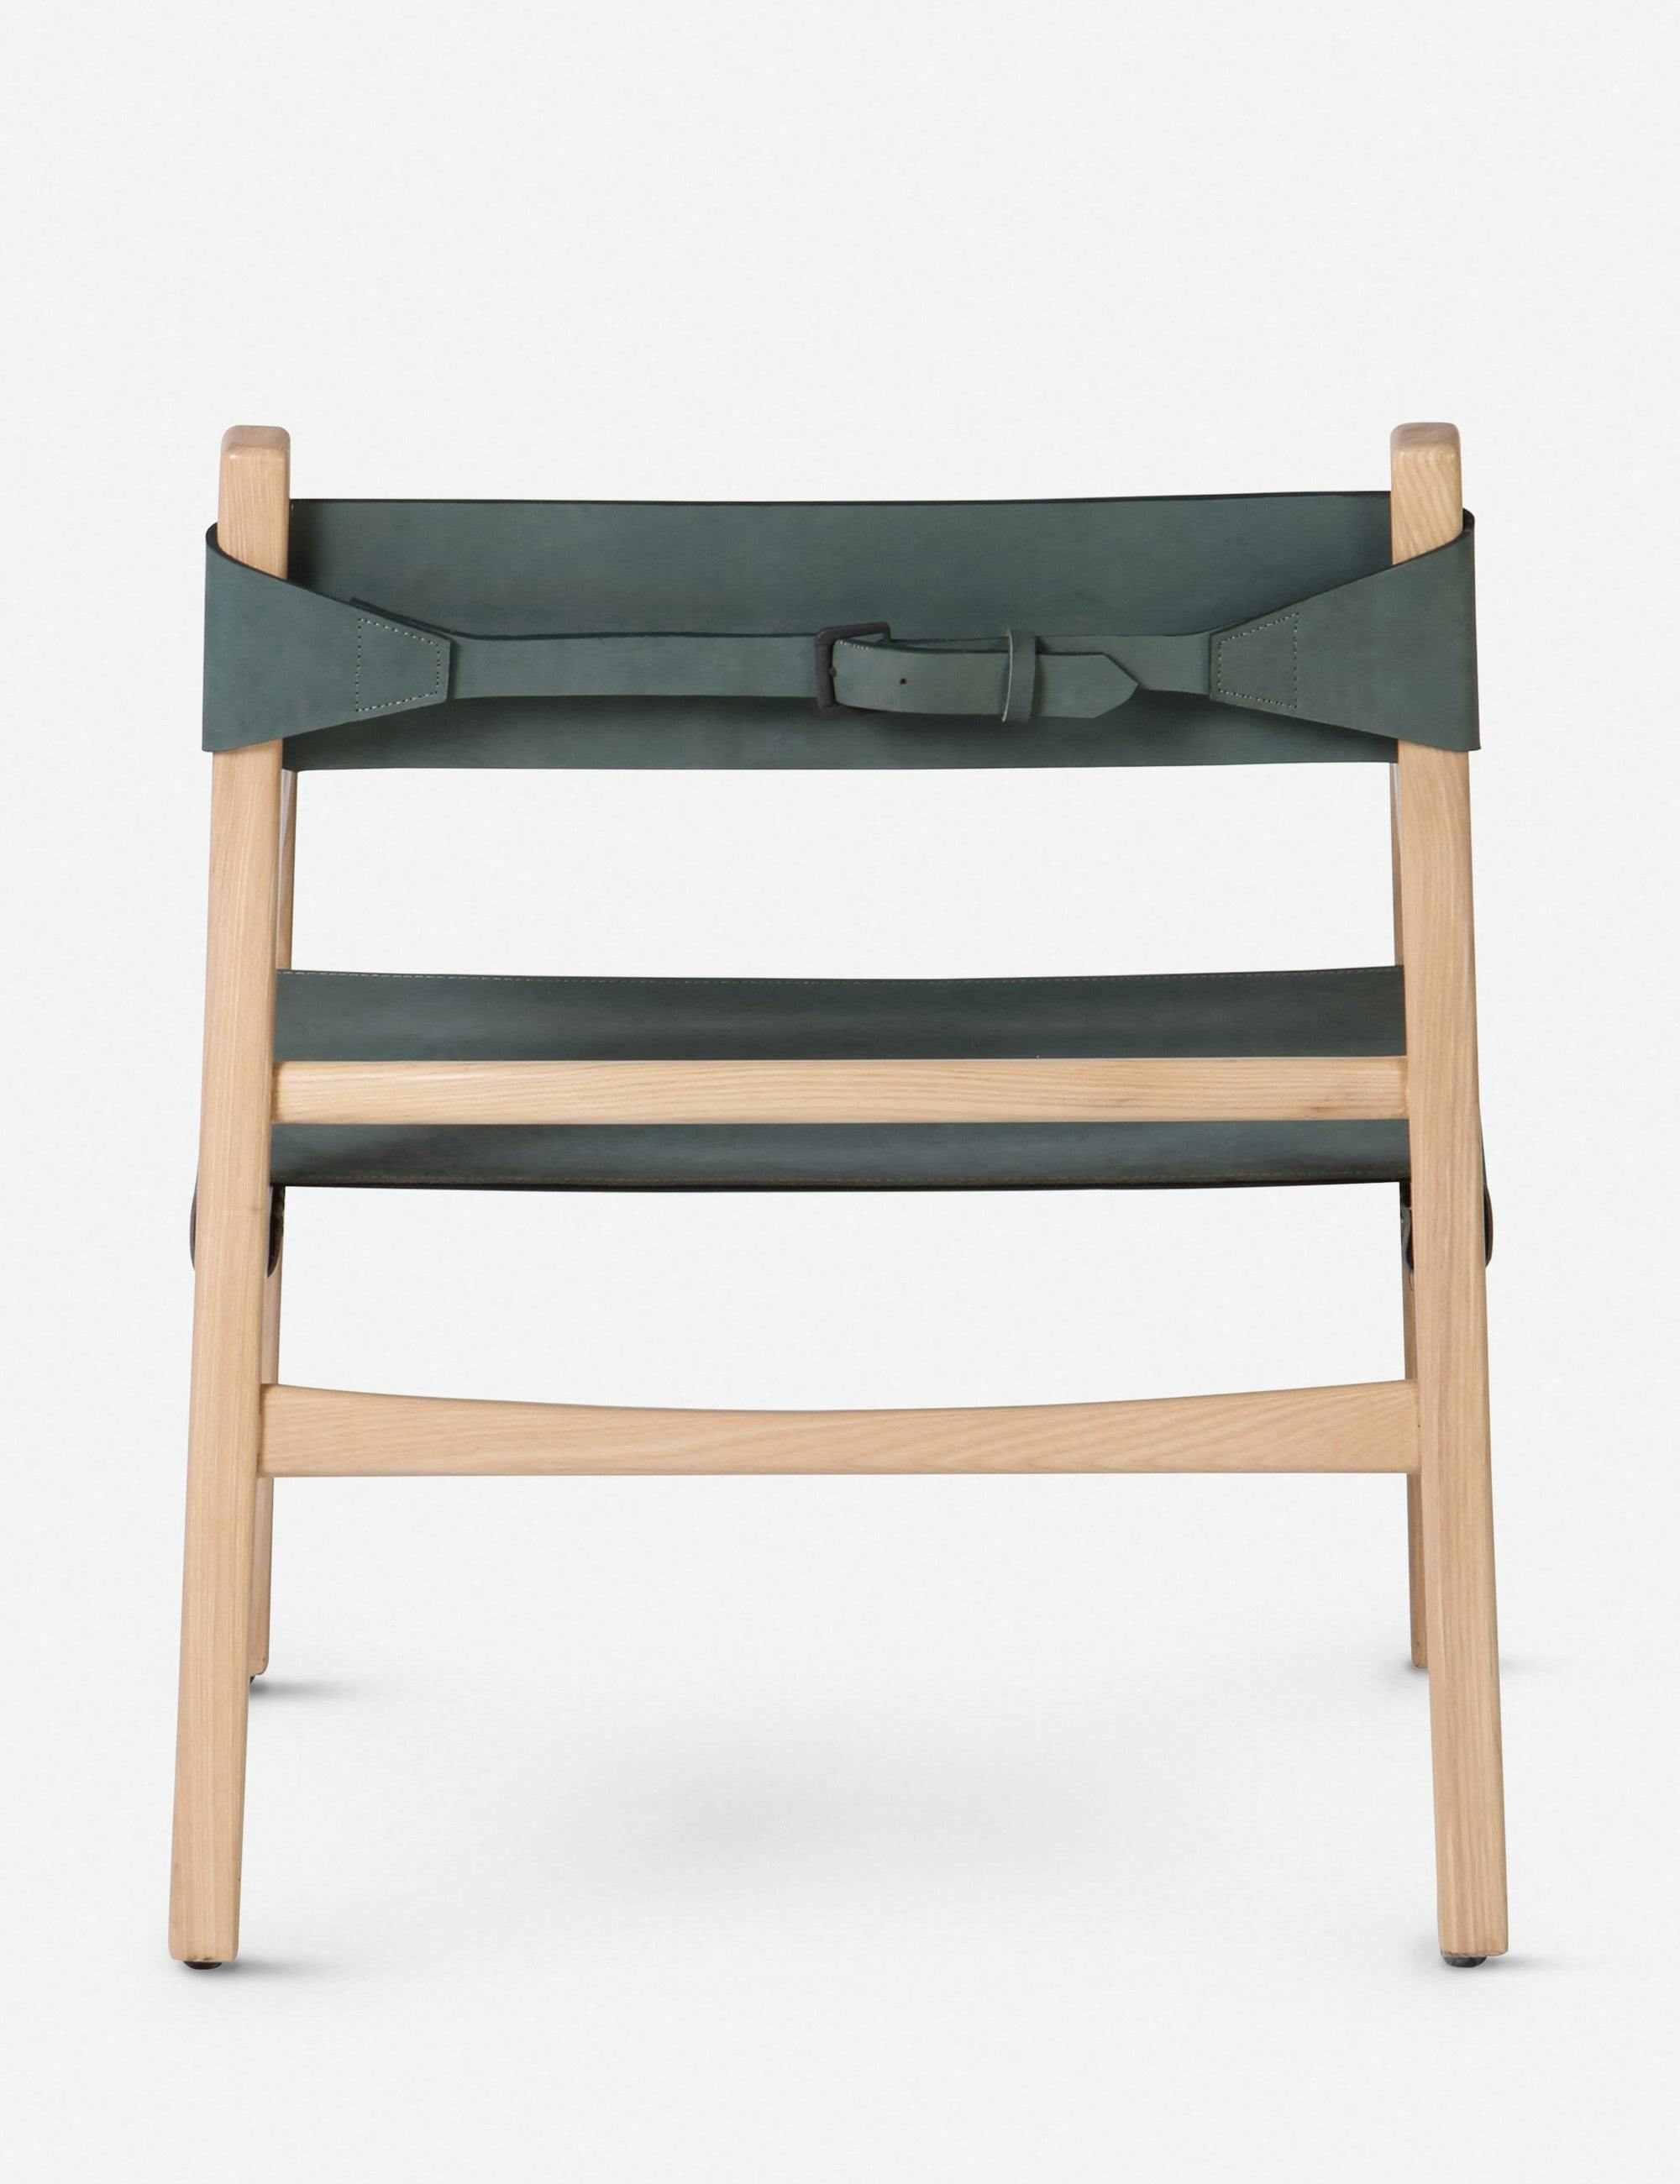 Minimalist Beige Leather and Ash Wood Accent Chair